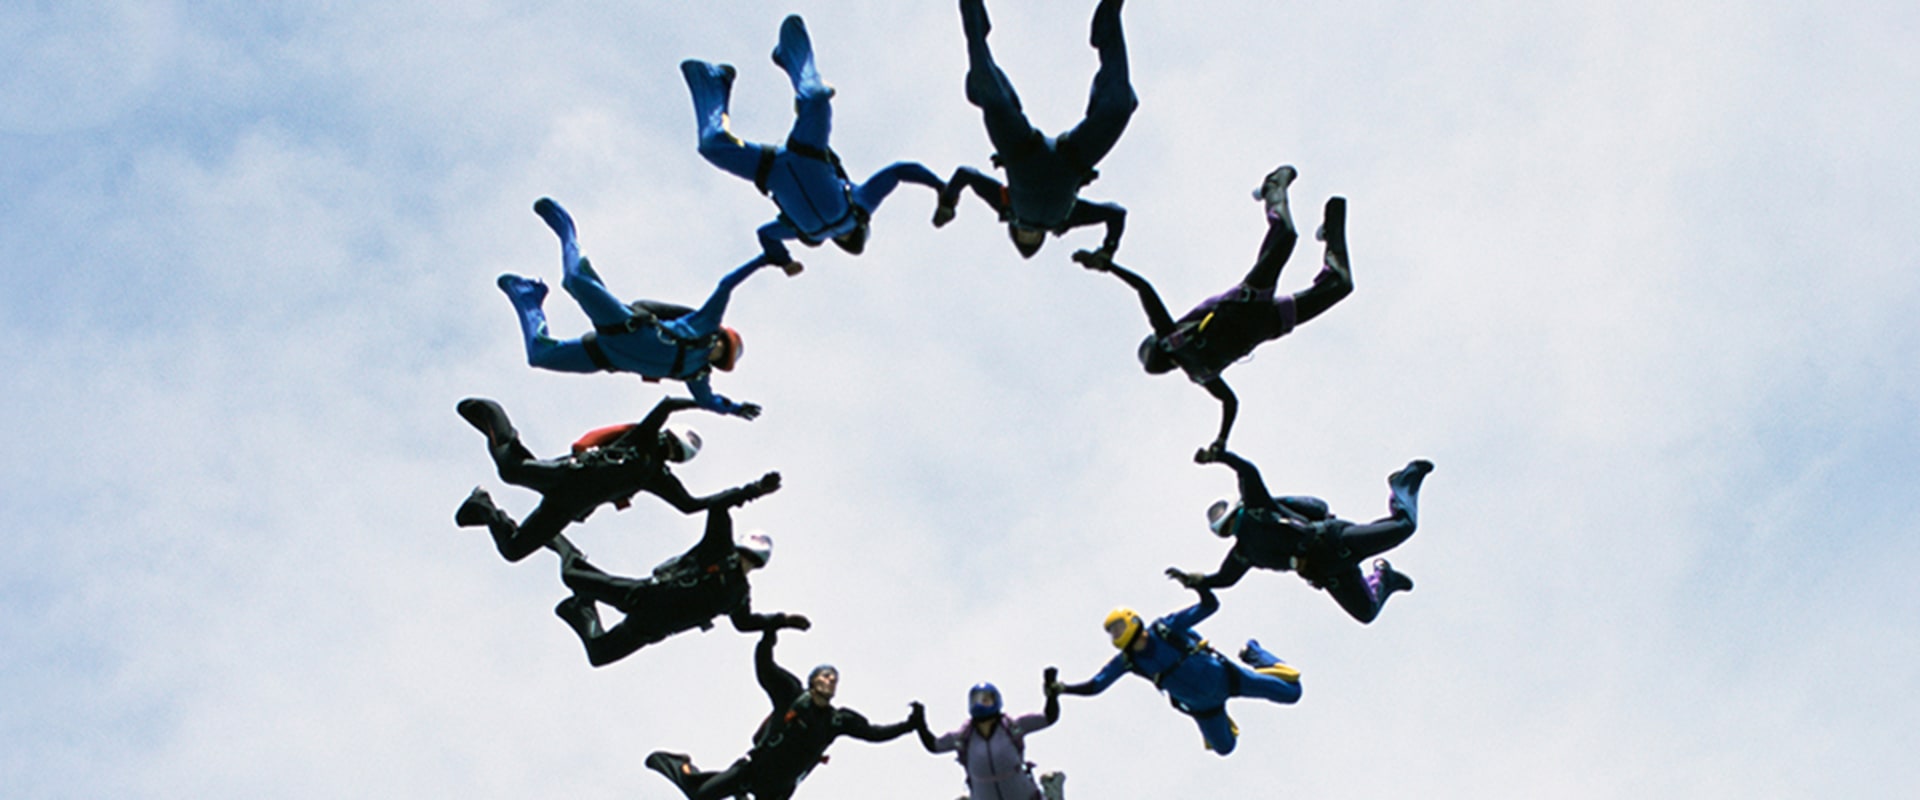 How can working in a team make us more resilient?